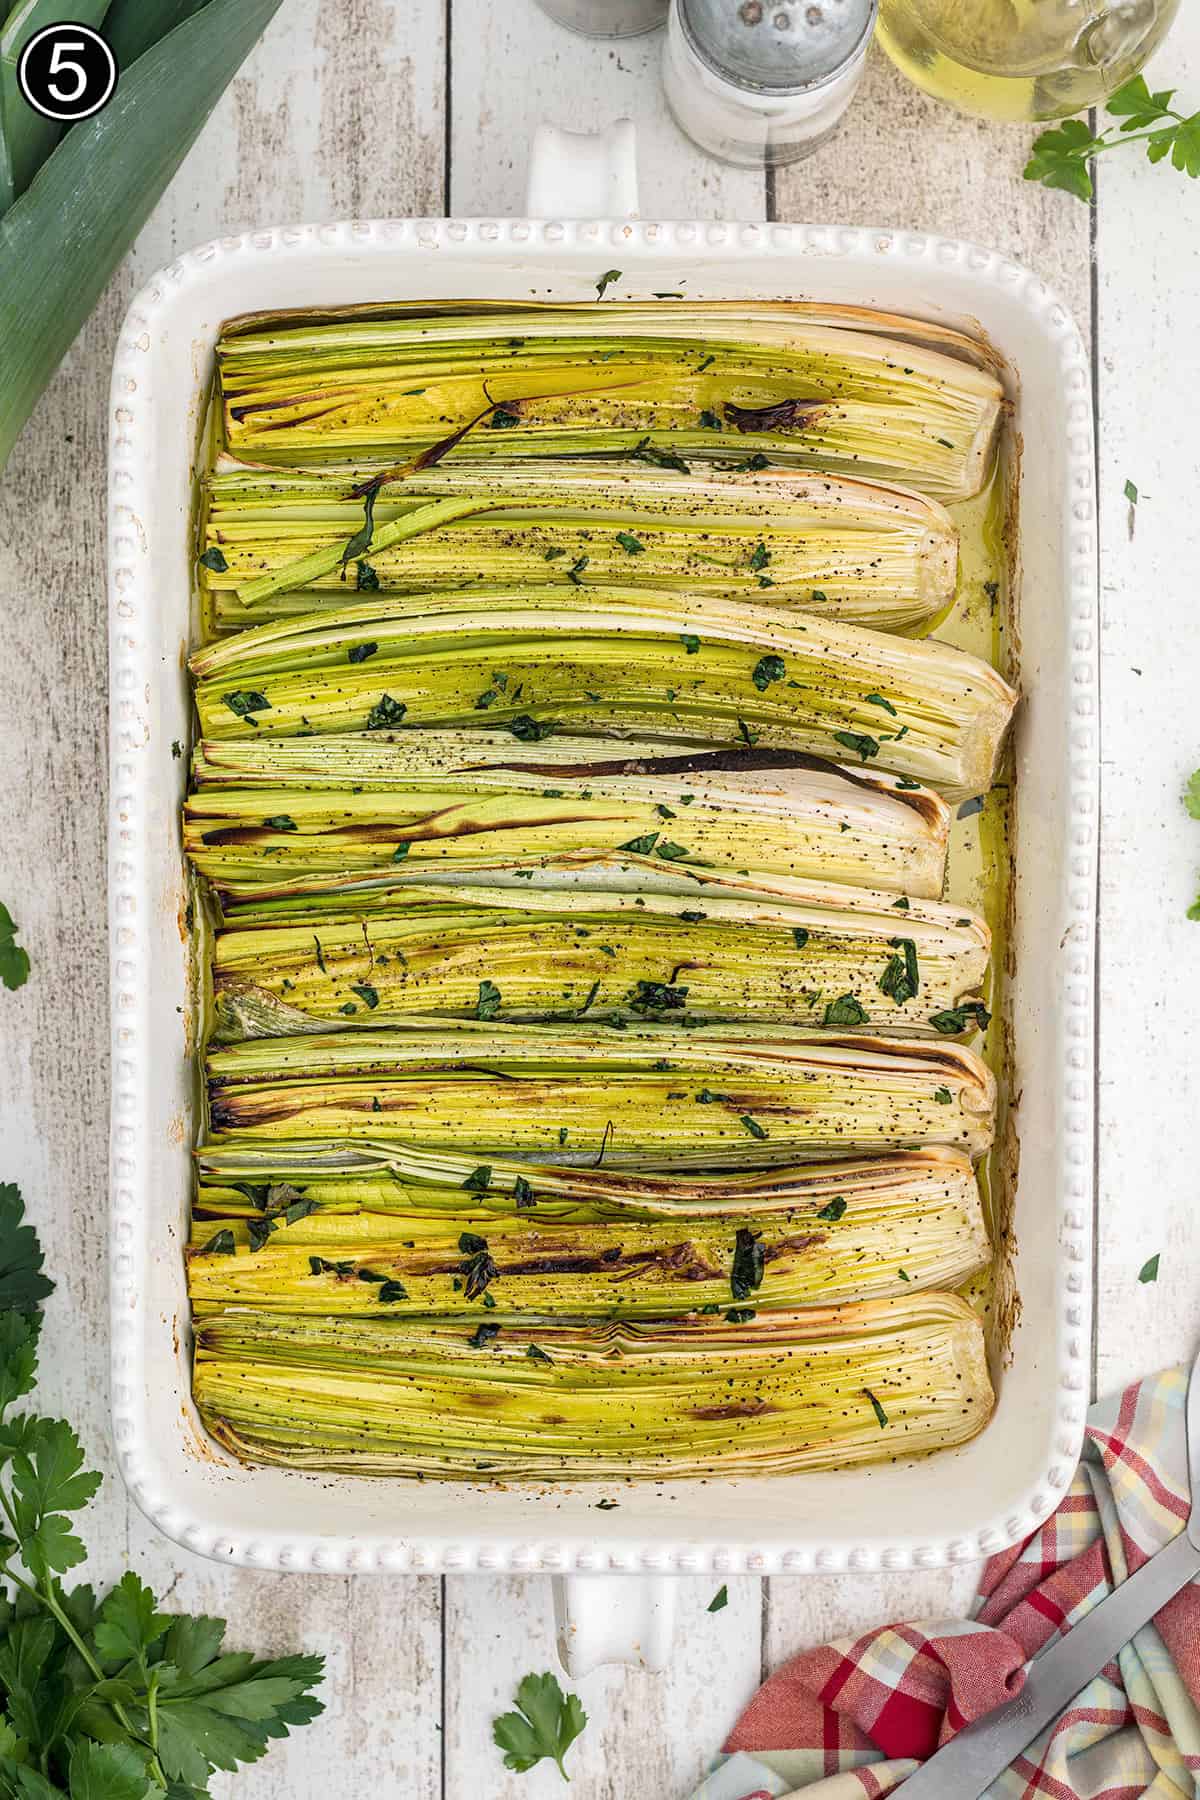 Baked leeks in a dish.